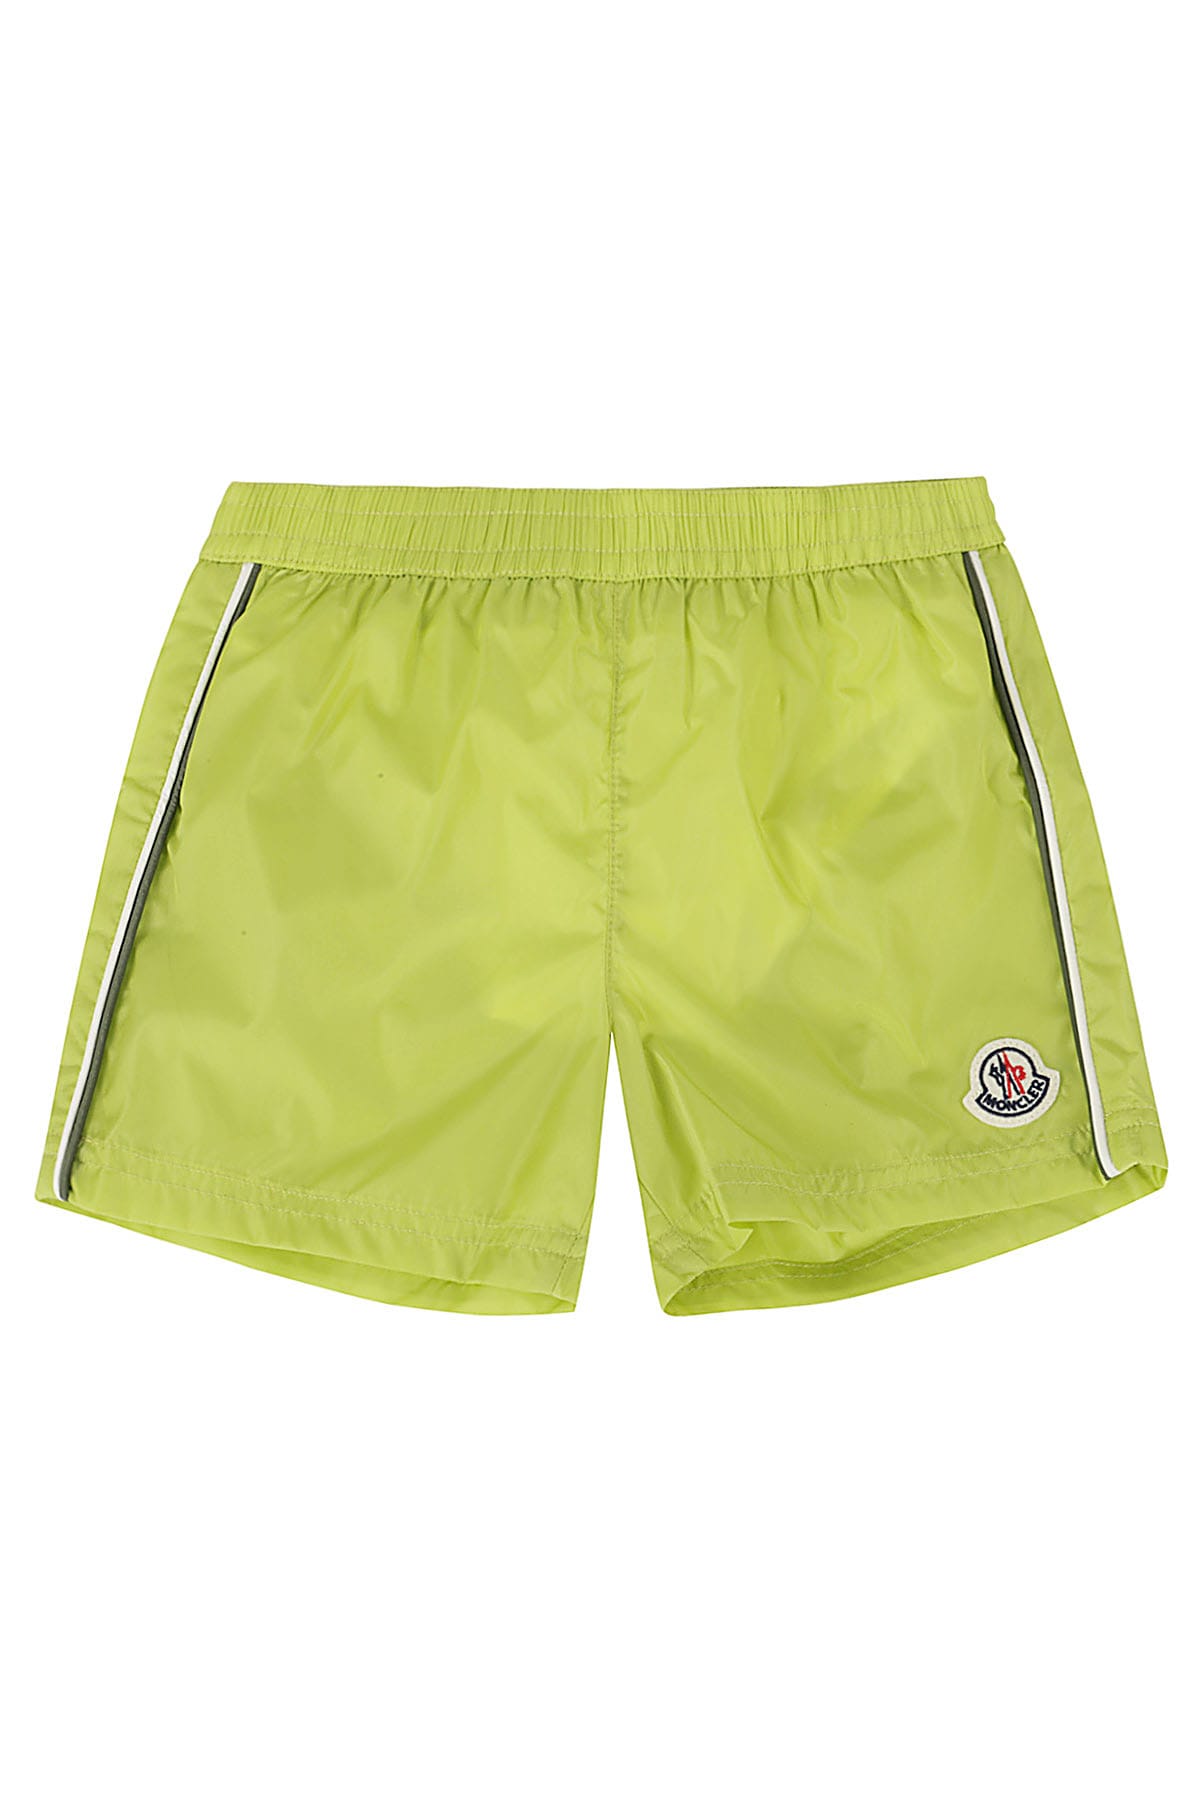 Moncler Kids' Shorts In G Lime